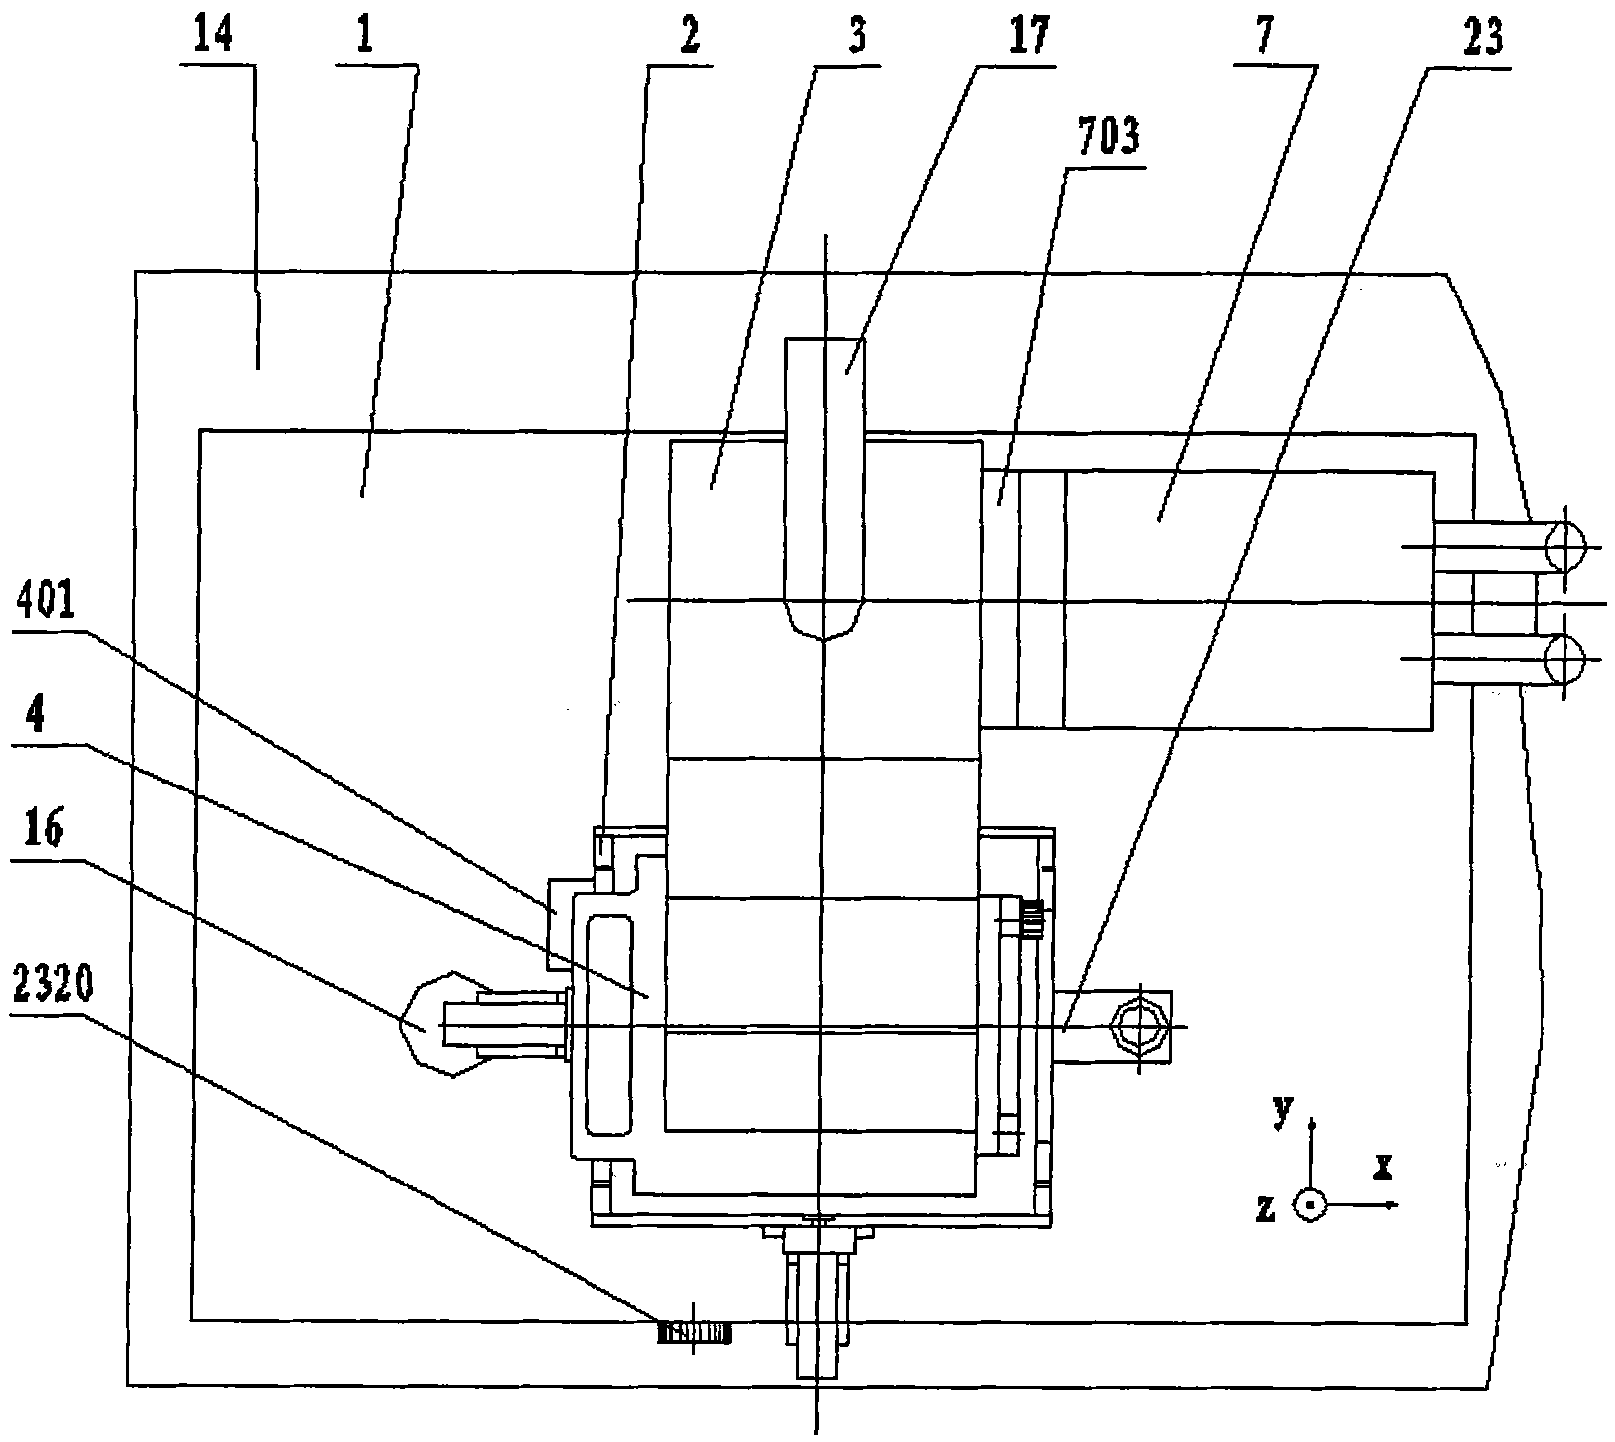 Dual-purpose copy arrangement for ultraviolet lighting micro-nano graph air pressure stamping and photolithography